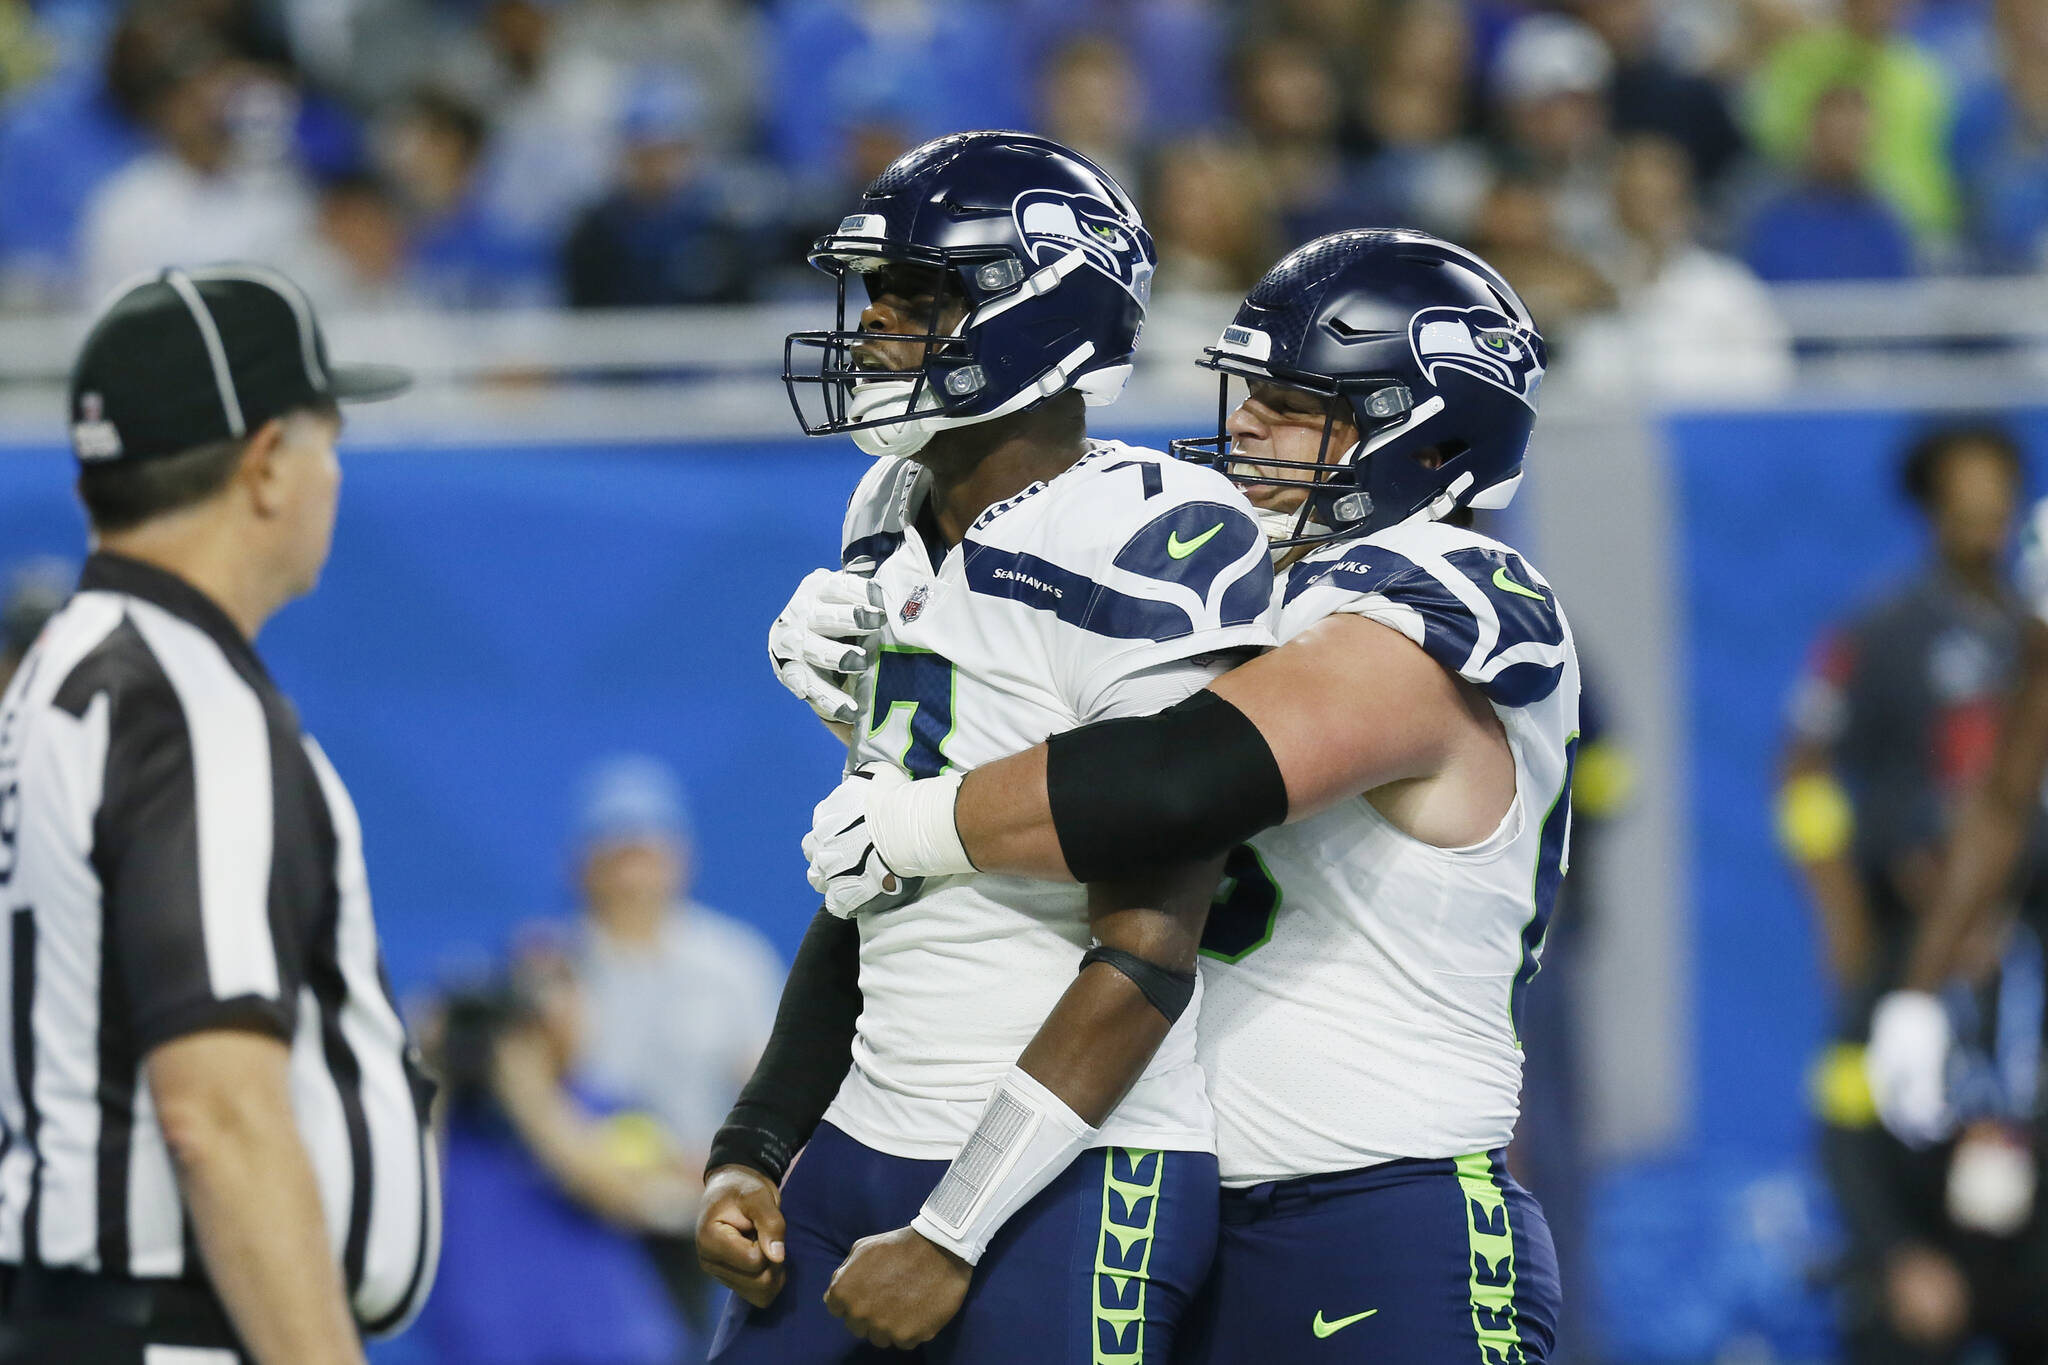 Seattle Seahawks quarterback Geno Smith is hugged by center Austin Blythe, right, after Smith rushed for an 8-yard touchdown during the first half of Sunday’s game against the Detroit Lions. (AP Photo/Duane Burleson)